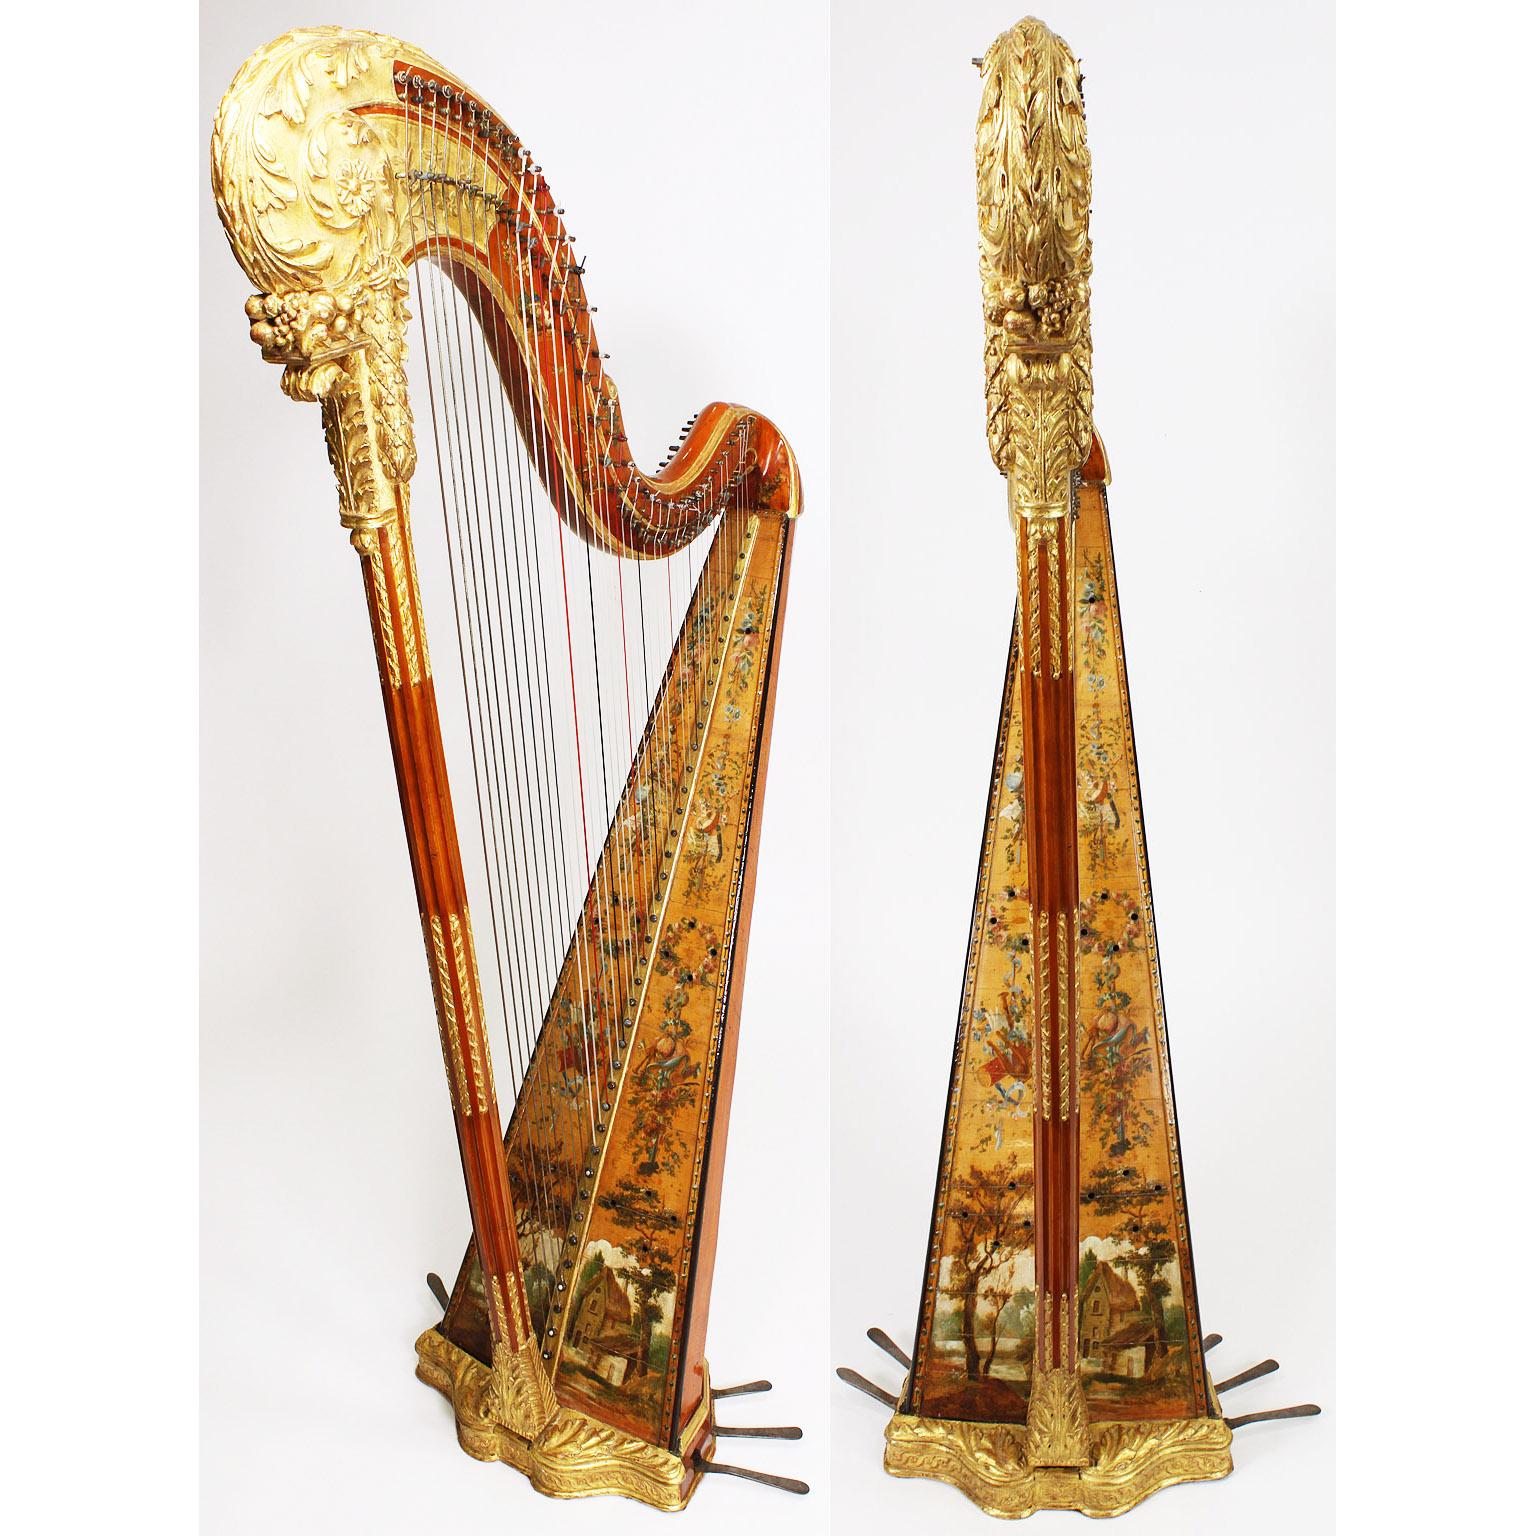 A very fine French Louis XVI period carved, gilt and hand painted wooden Harp by Jean-Henri Naderman (Swiss, 1735-1799). The ornately carved body with acanthus leaves and painted with flowers, ribbons, musical trophies and pastoral scenes as well as